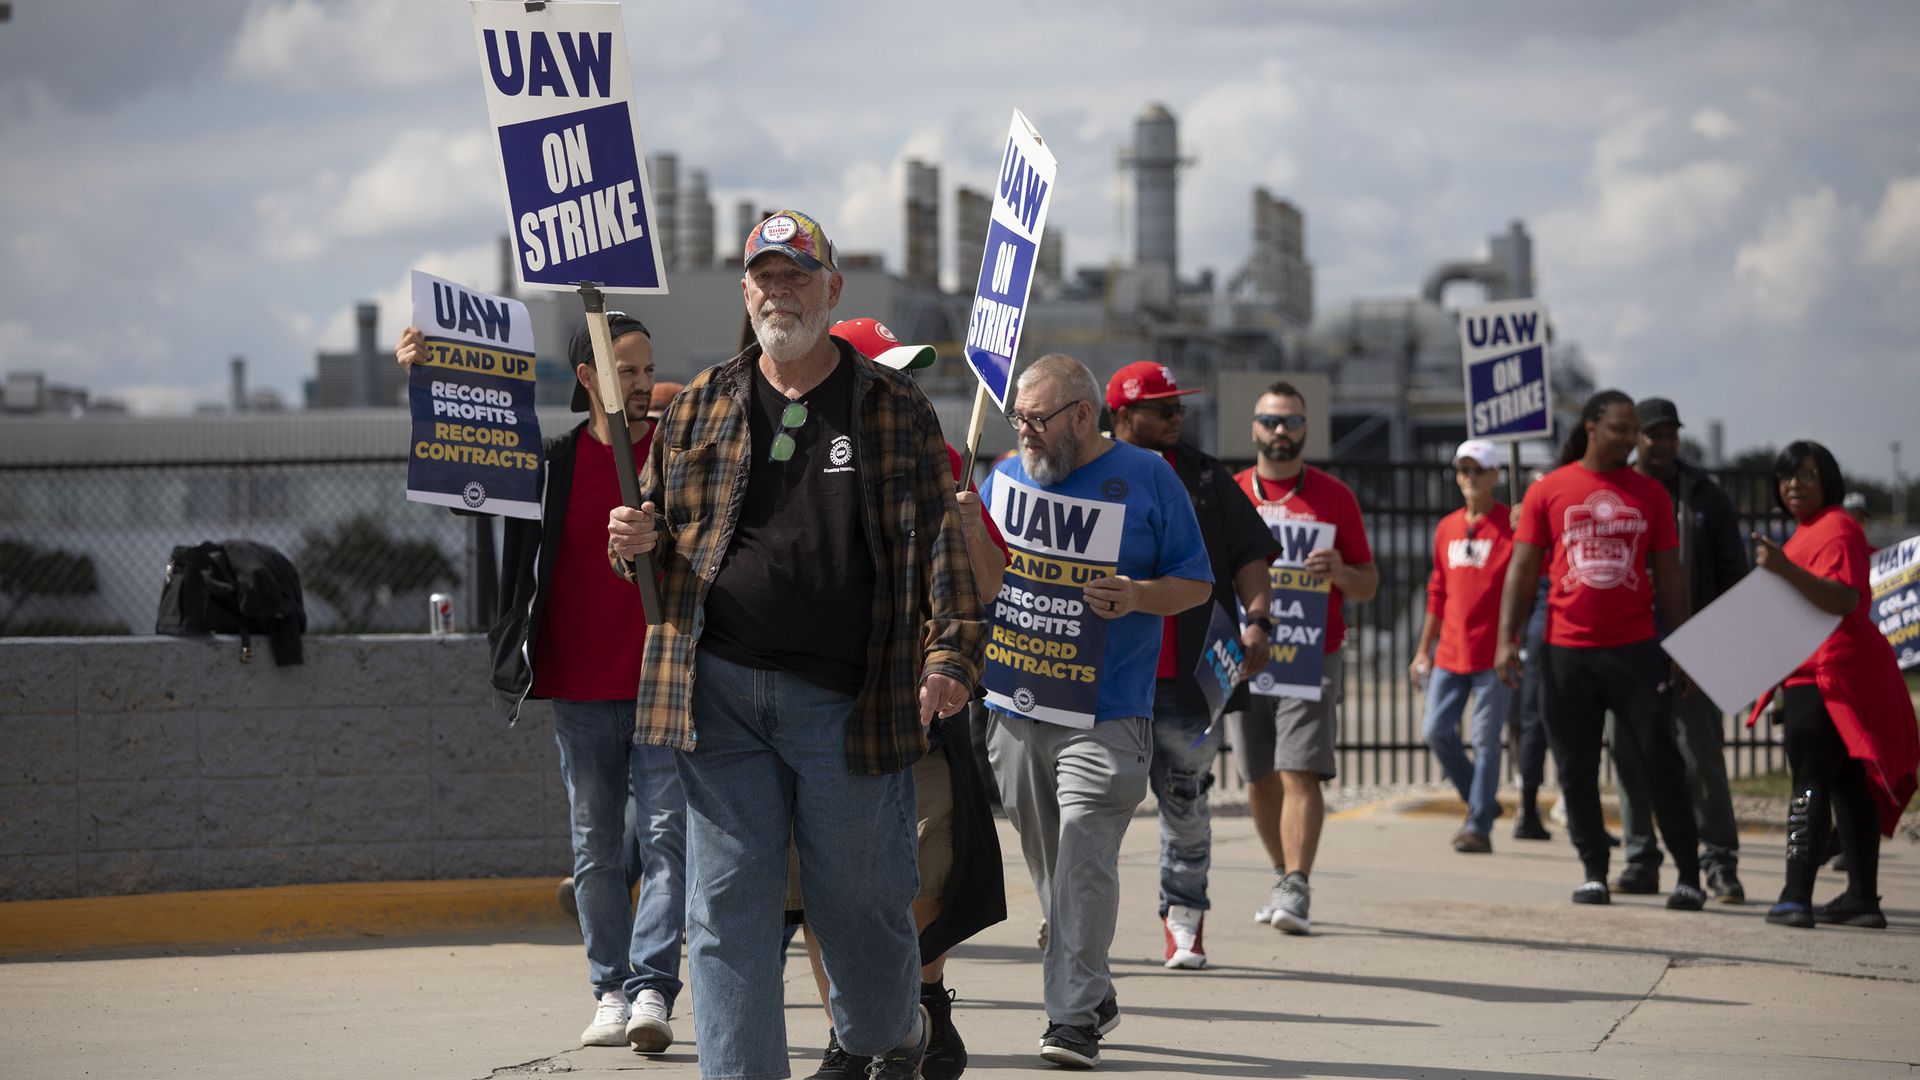 United Auto Workers (UAW) members striking outside of a Ford assembly plant in Wayne, Michigan, on Sept. 15.